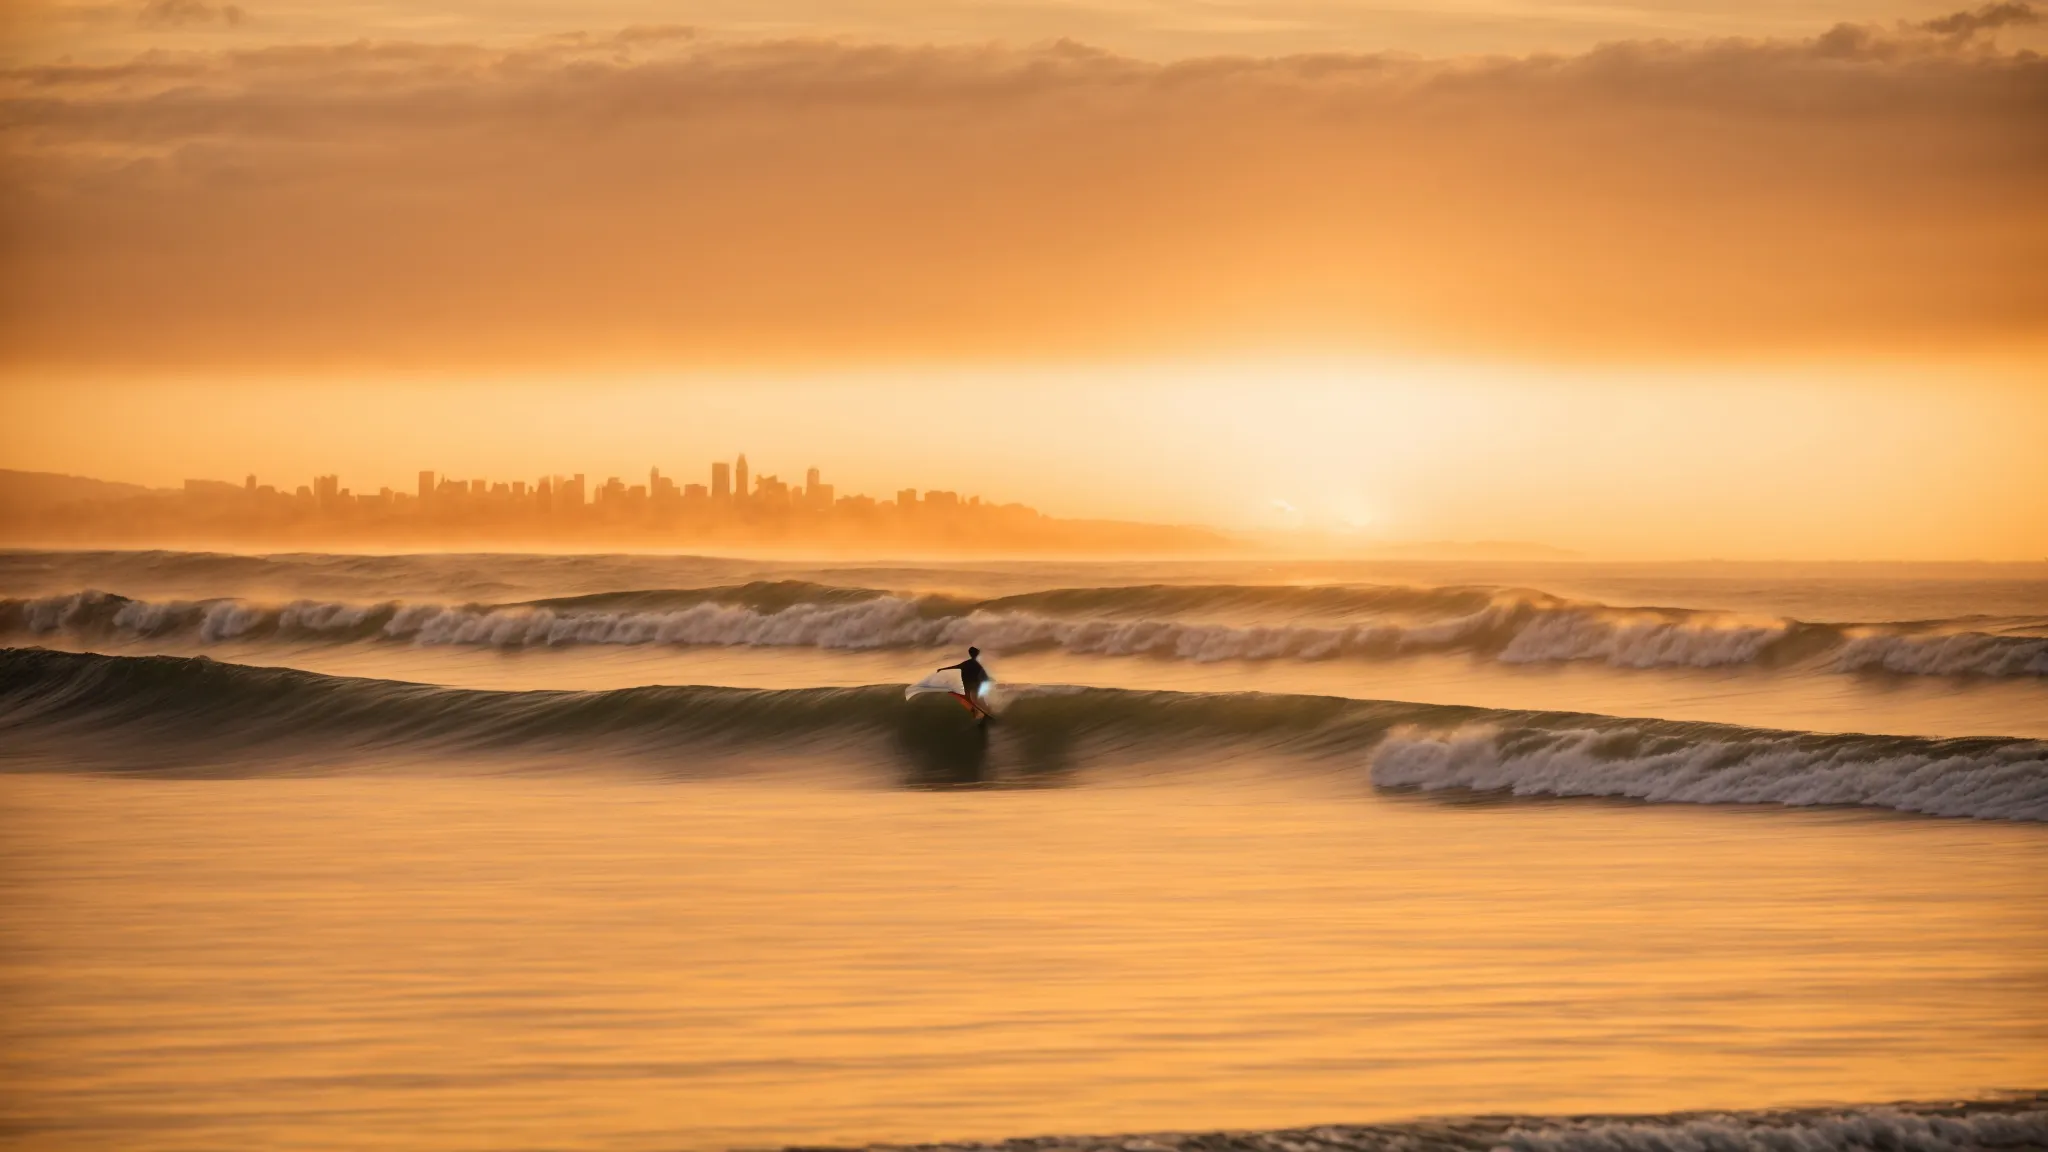 a surfer patiently waits on the crest of a gentle wave, looking towards a distant skyline of san diego under a golden sunset.